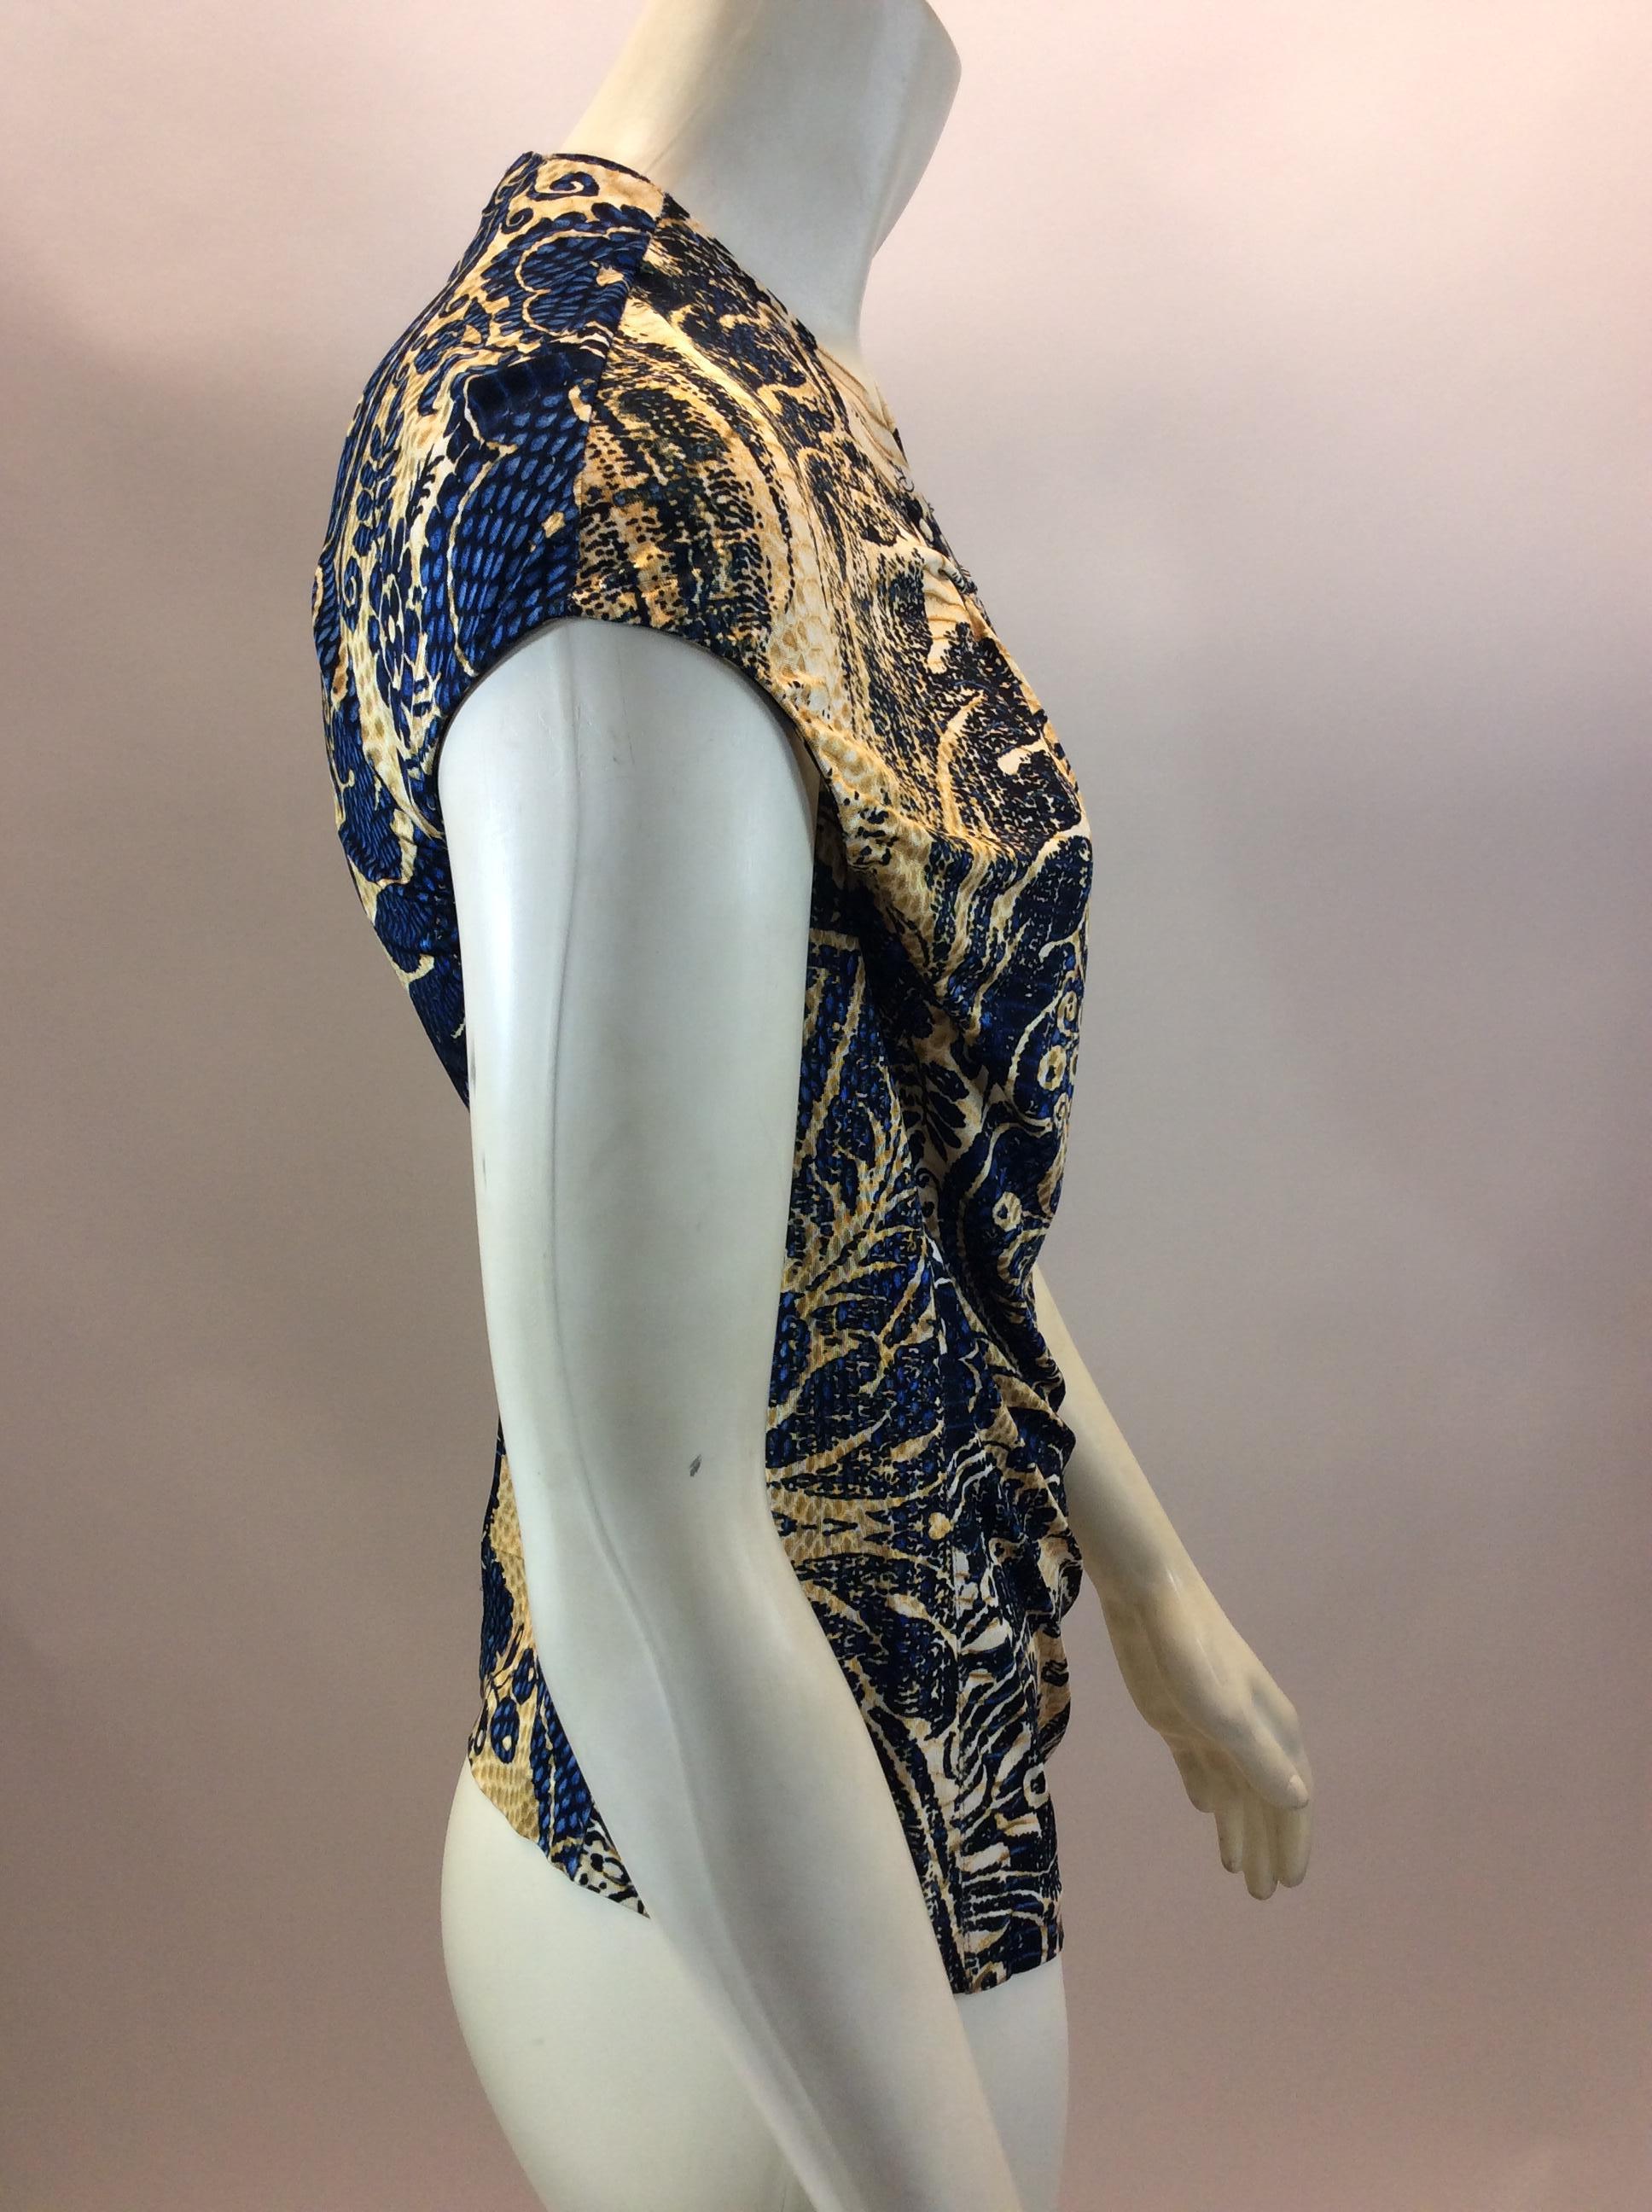 Roberto Cavalli Blue and Gold Print Blouse In Good Condition For Sale In Narberth, PA